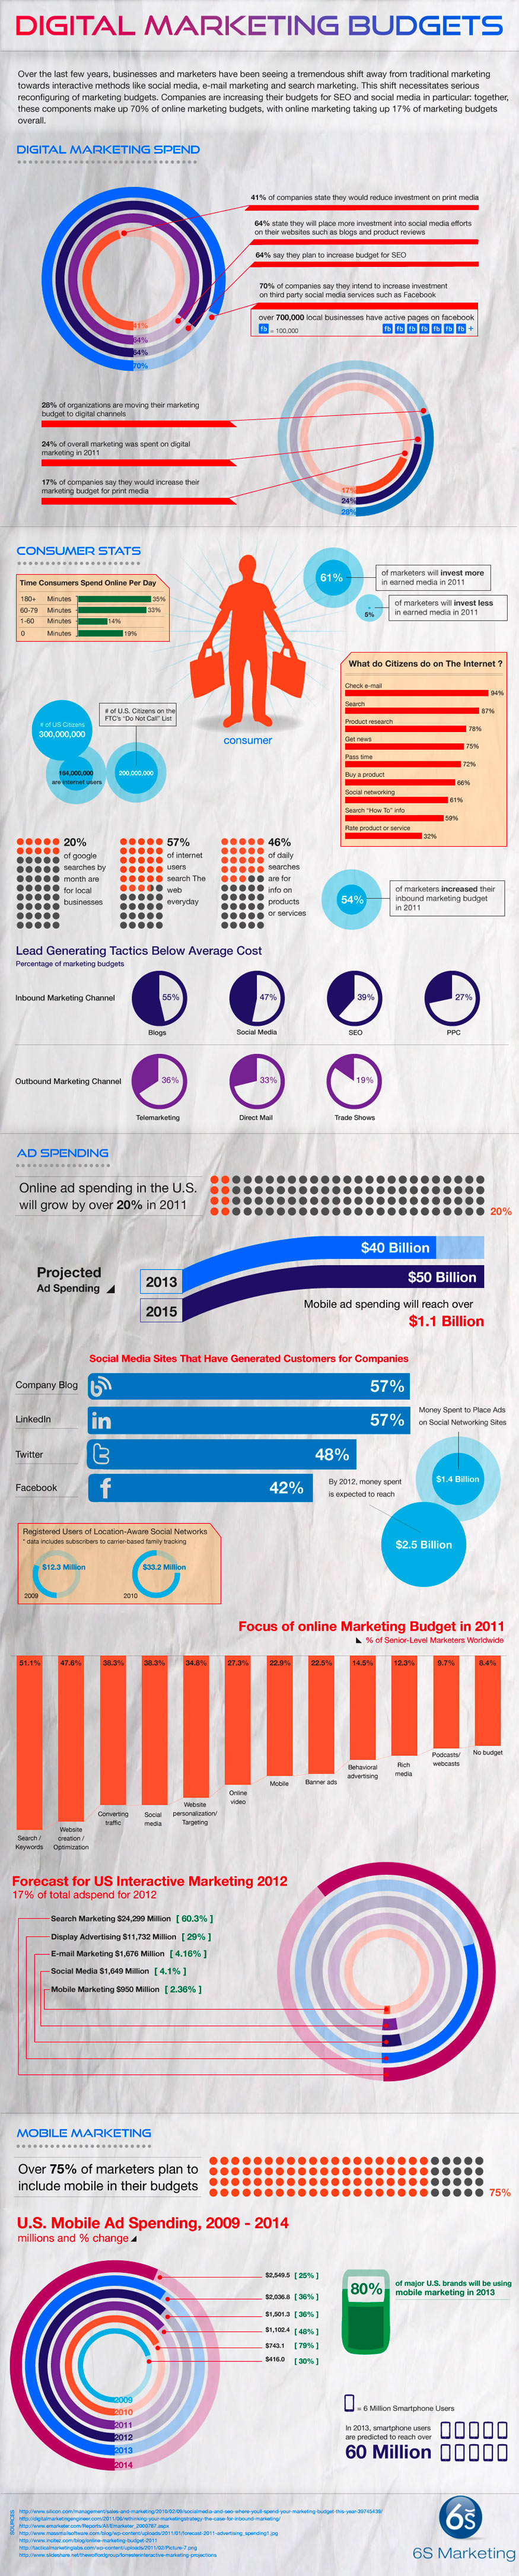 digital marketing budget trends 2012 How to Master Your Lead Generation Challenge with Social Media